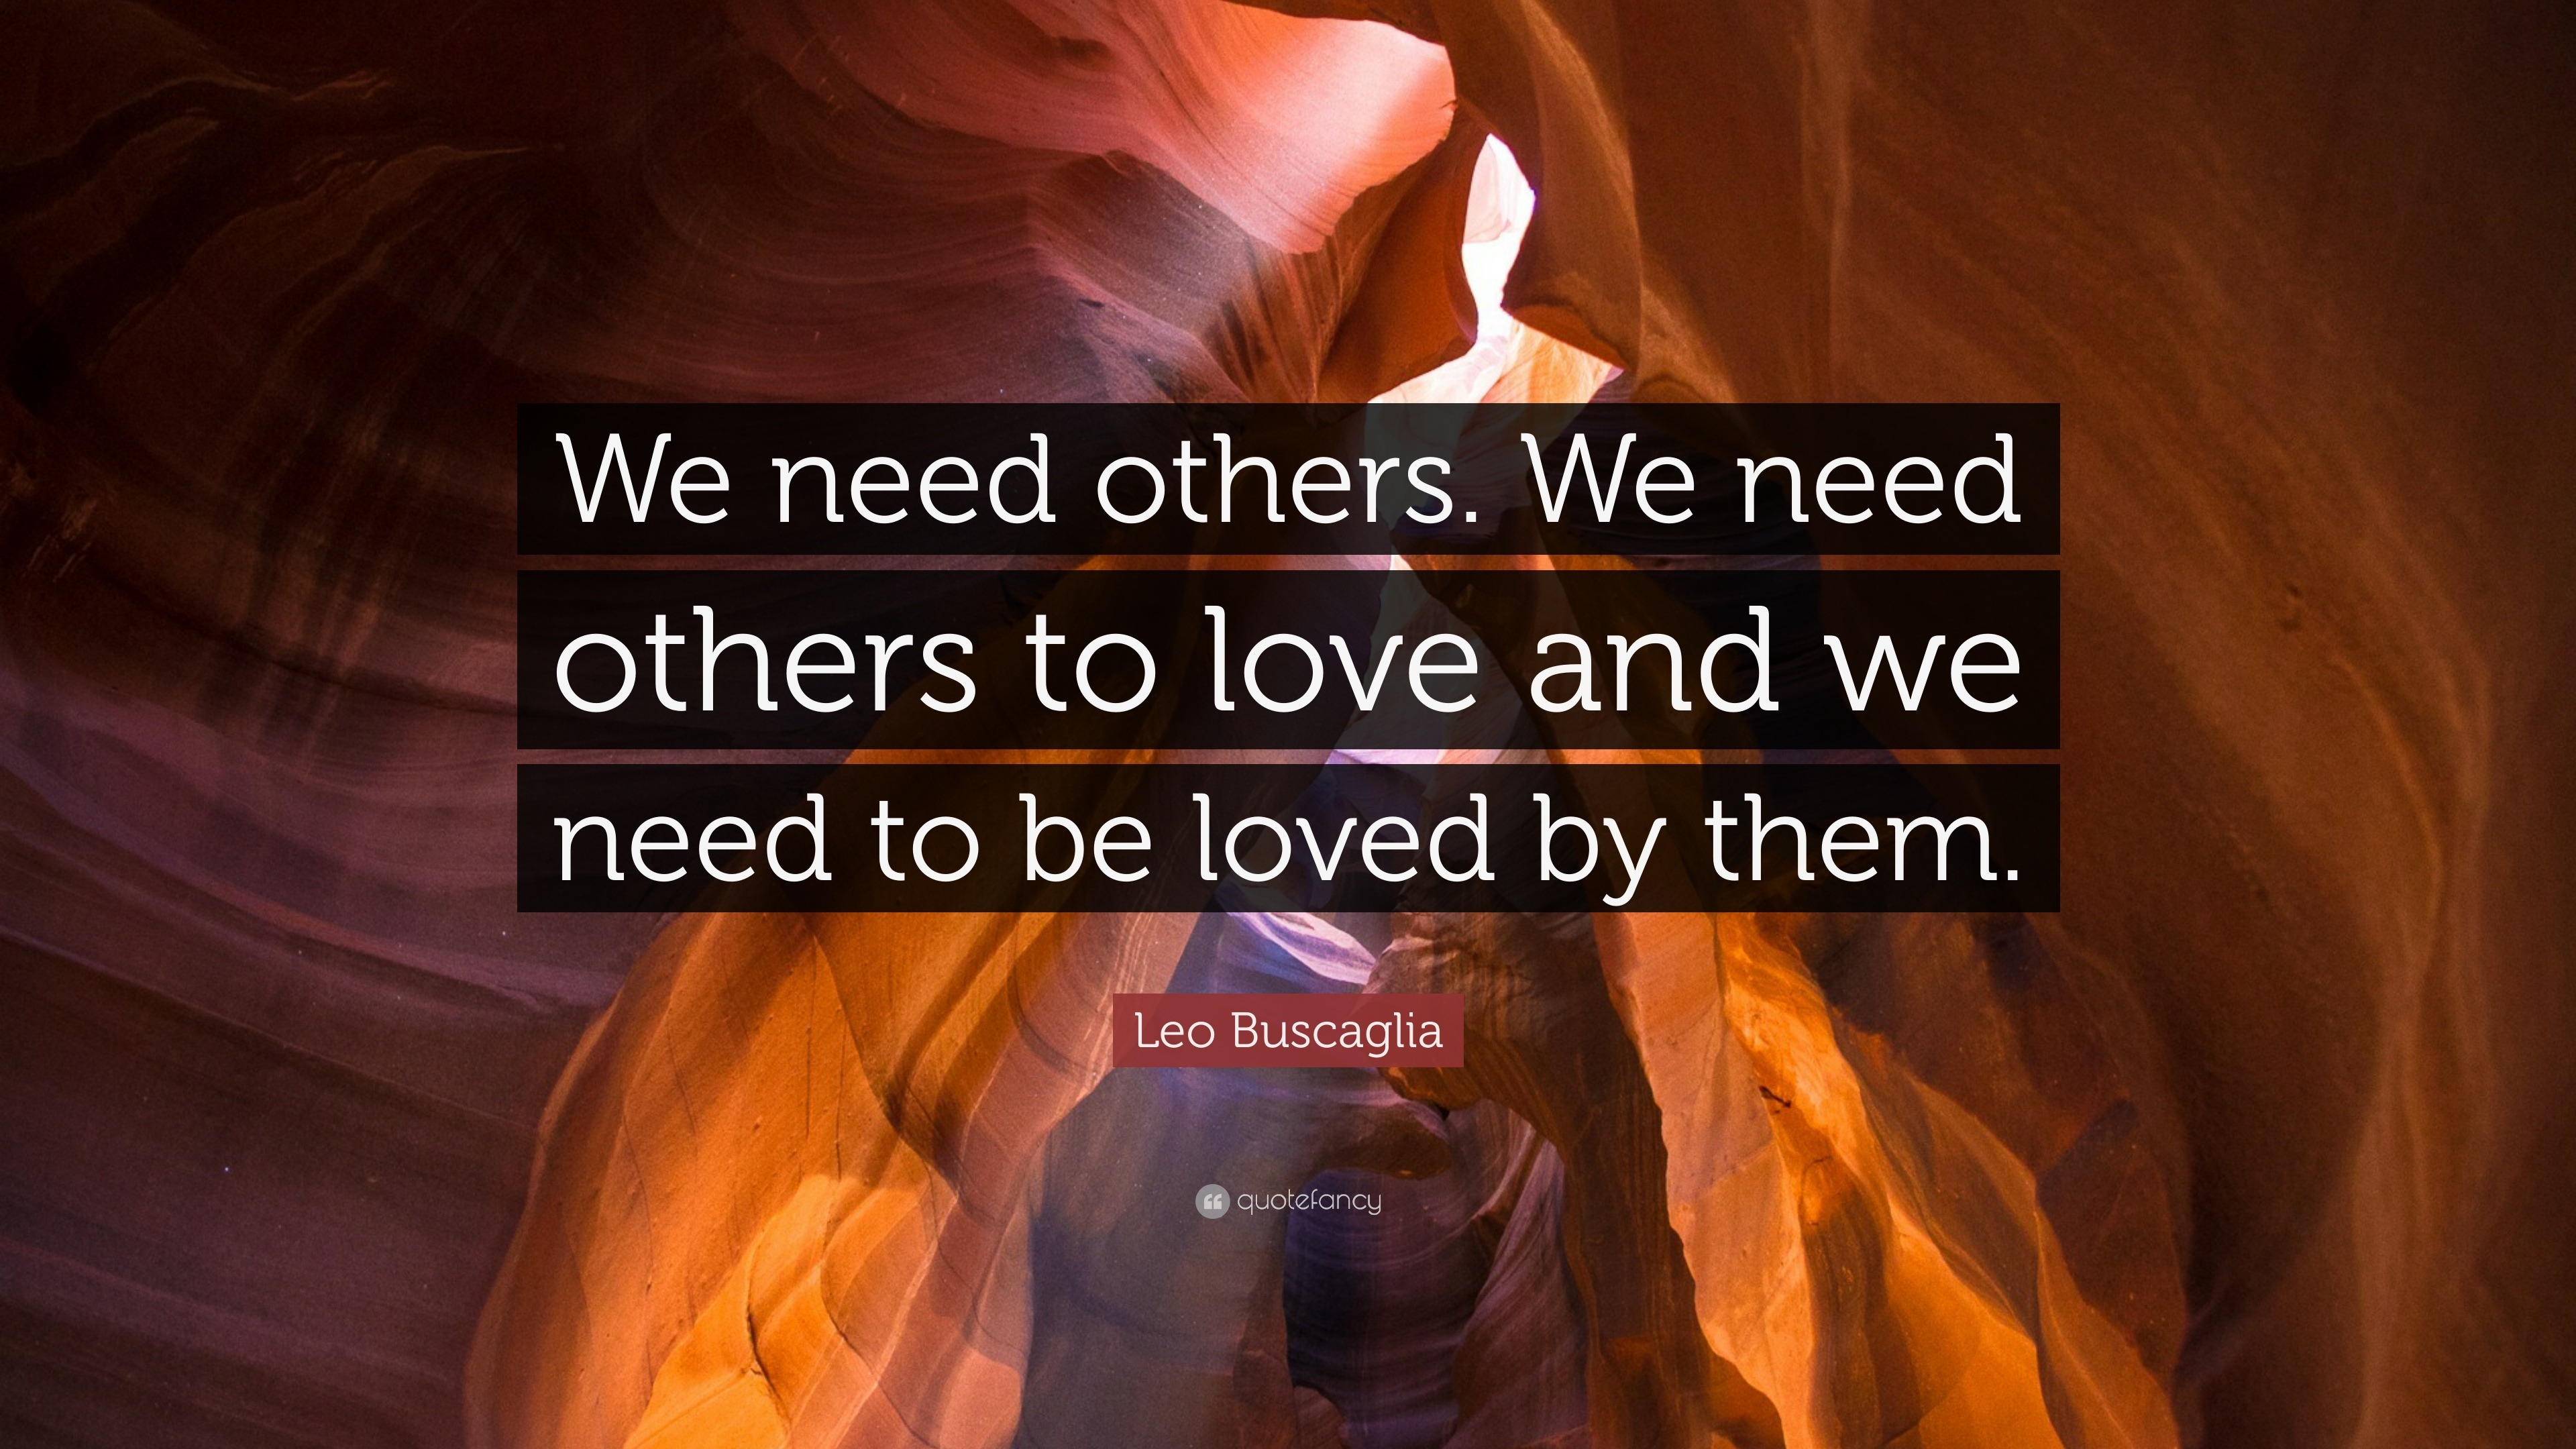 Leo Buscaglia Quote: “We need others. We need others to love and we ...